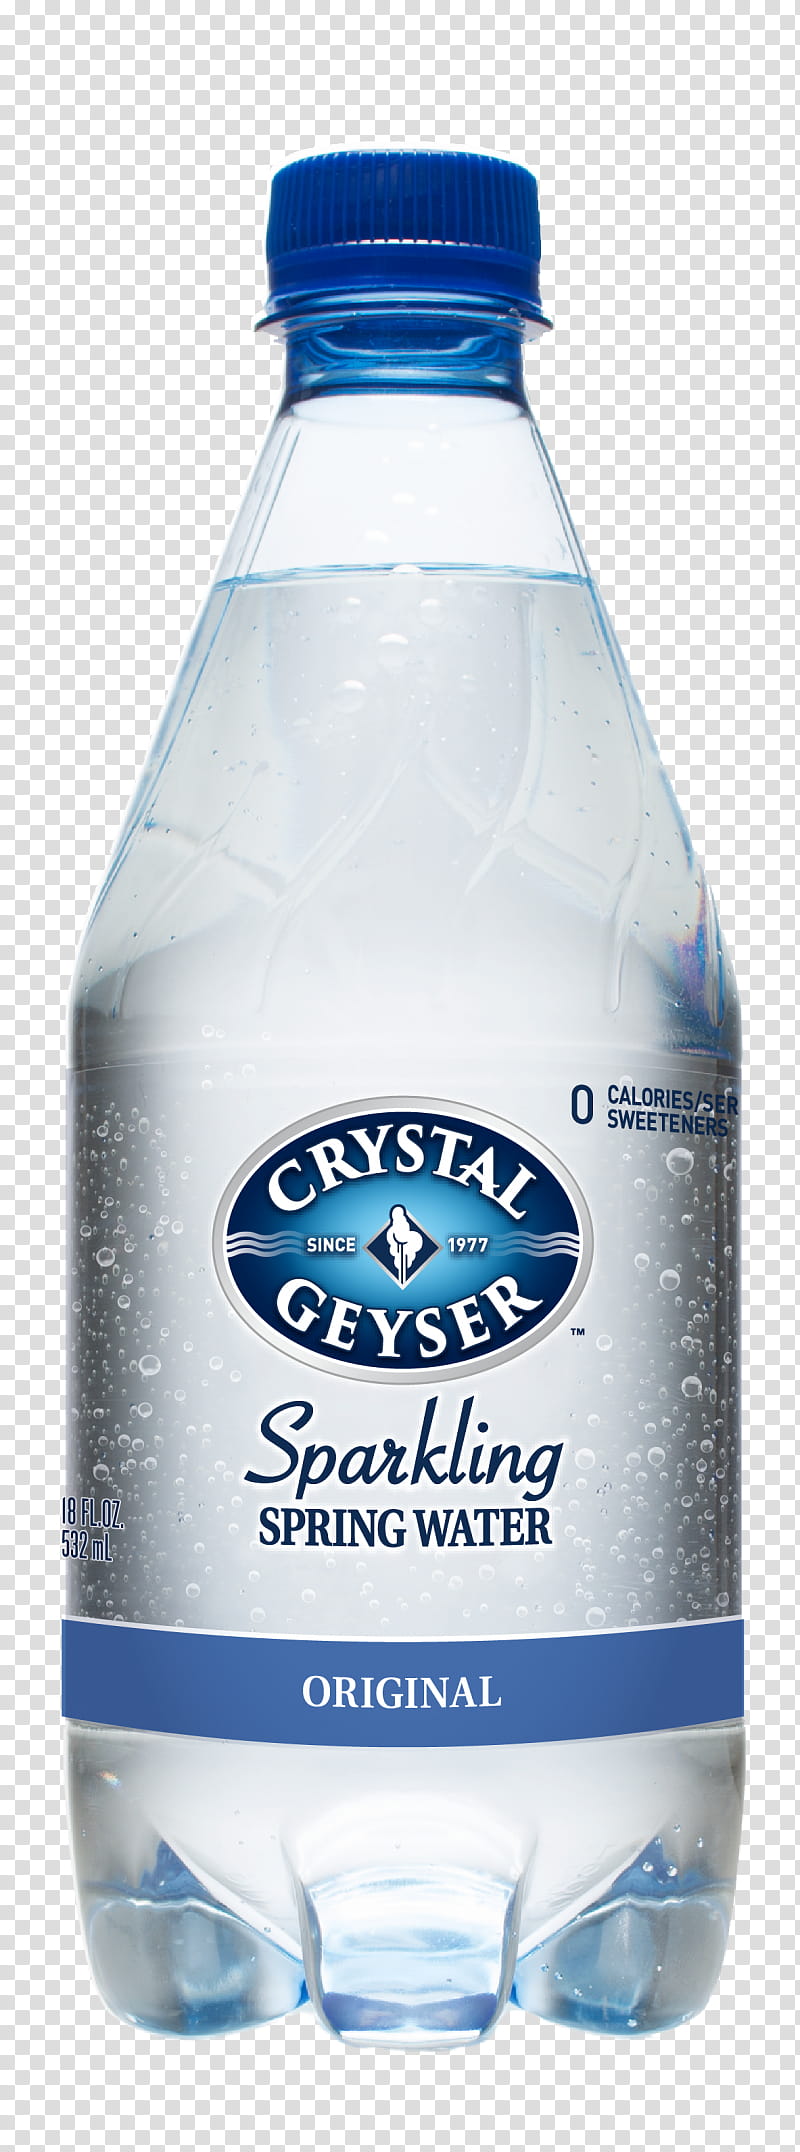 Spring, Carbonated Water, Fizzy Drinks, Crystal Geyser Water Company, Bottled Water, Cocktail, Crystal Geyser Sparkling Spring Water, Mineral Water transparent background PNG clipart